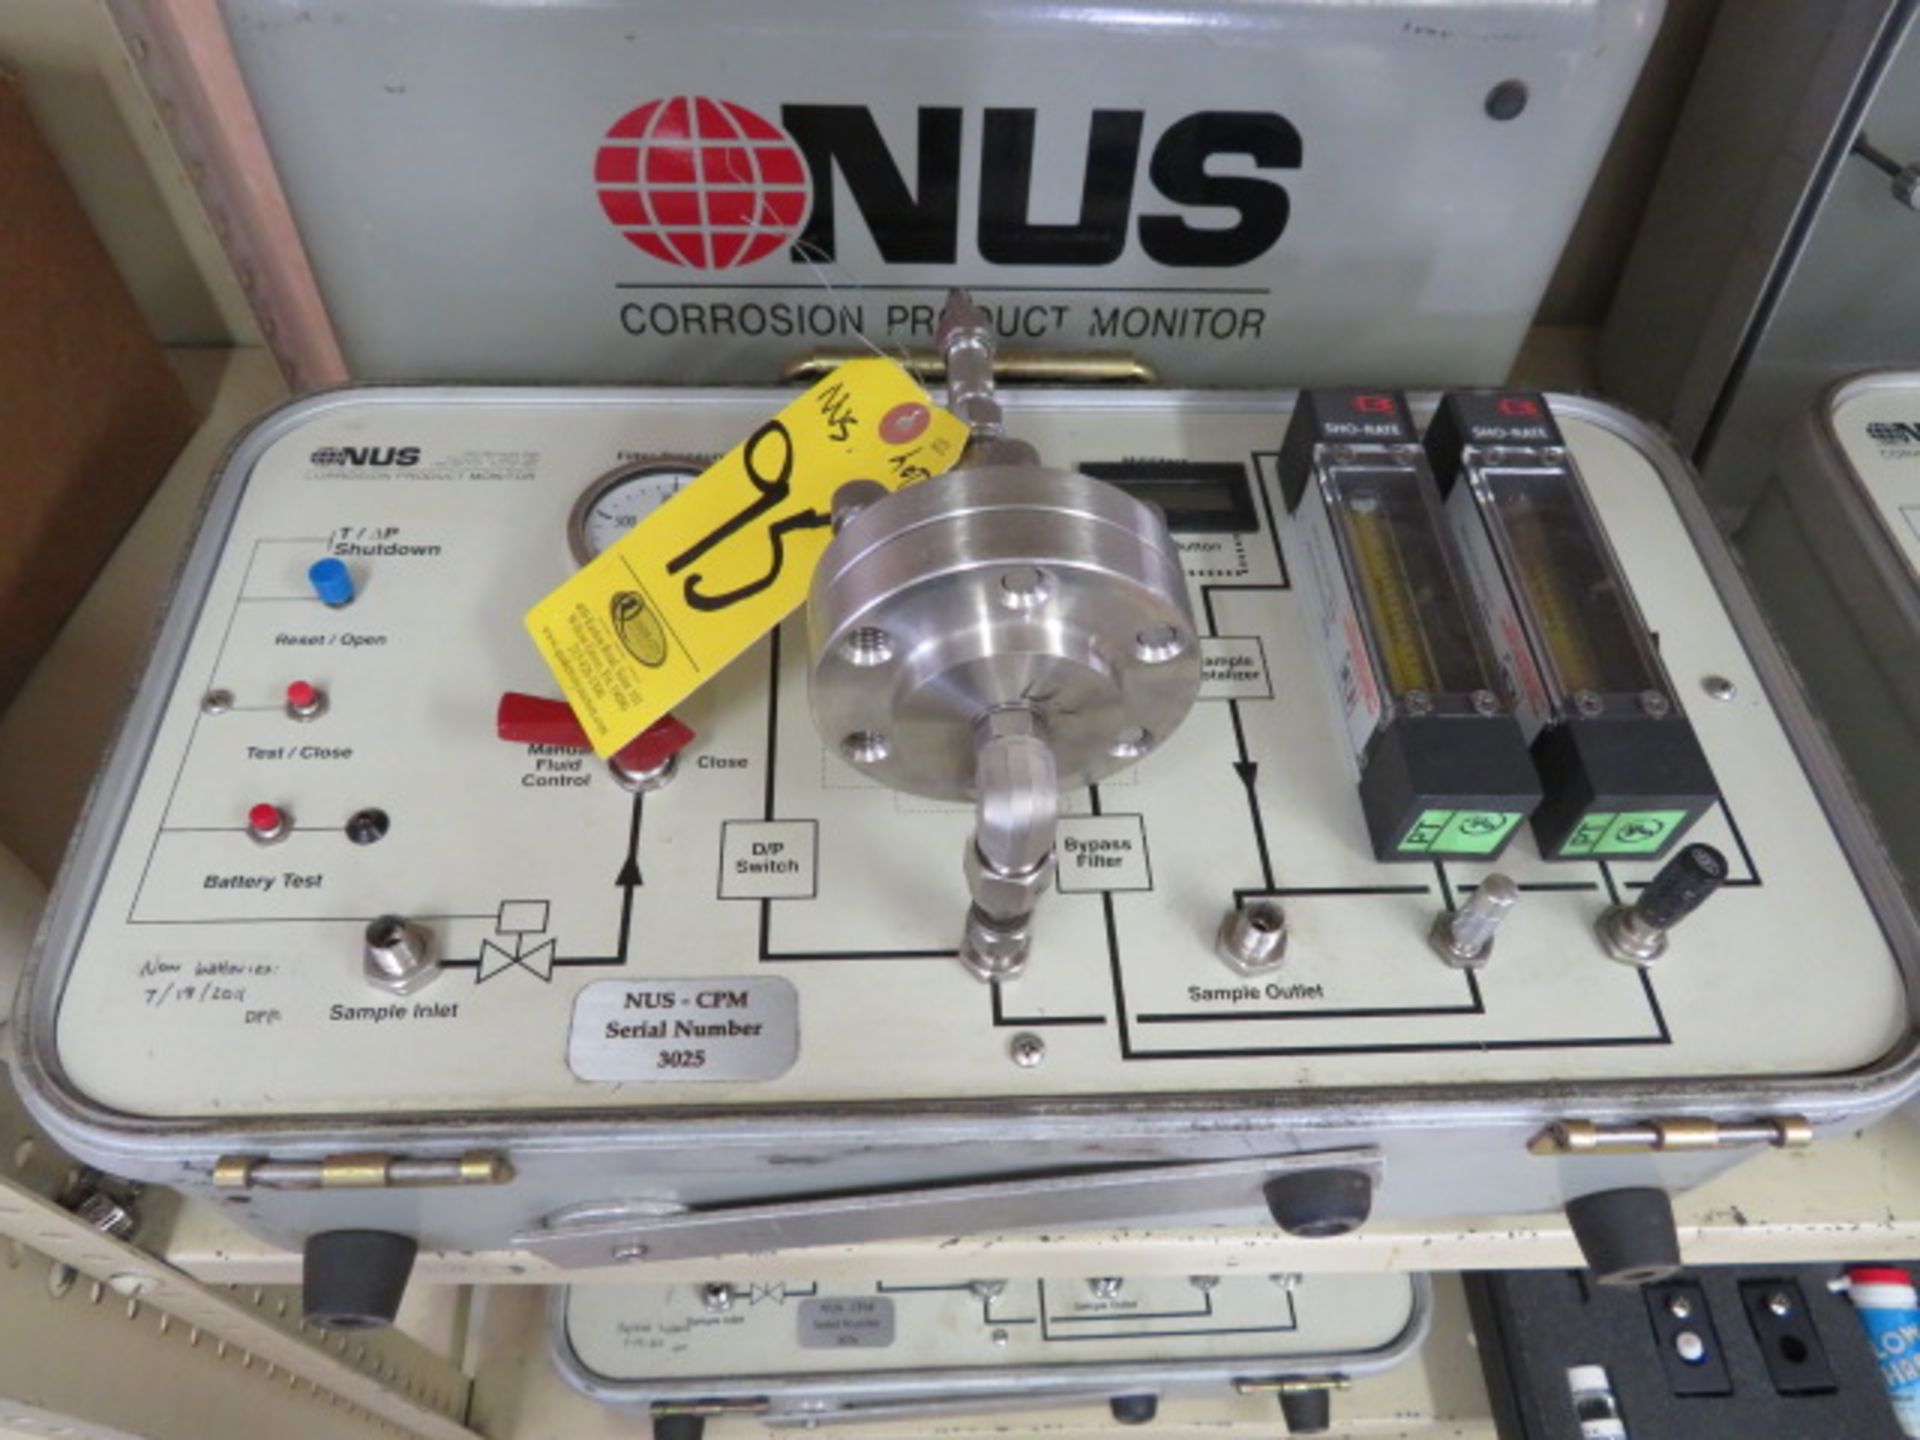 NUS-CPM CORROSION PRODUCT MONITOR